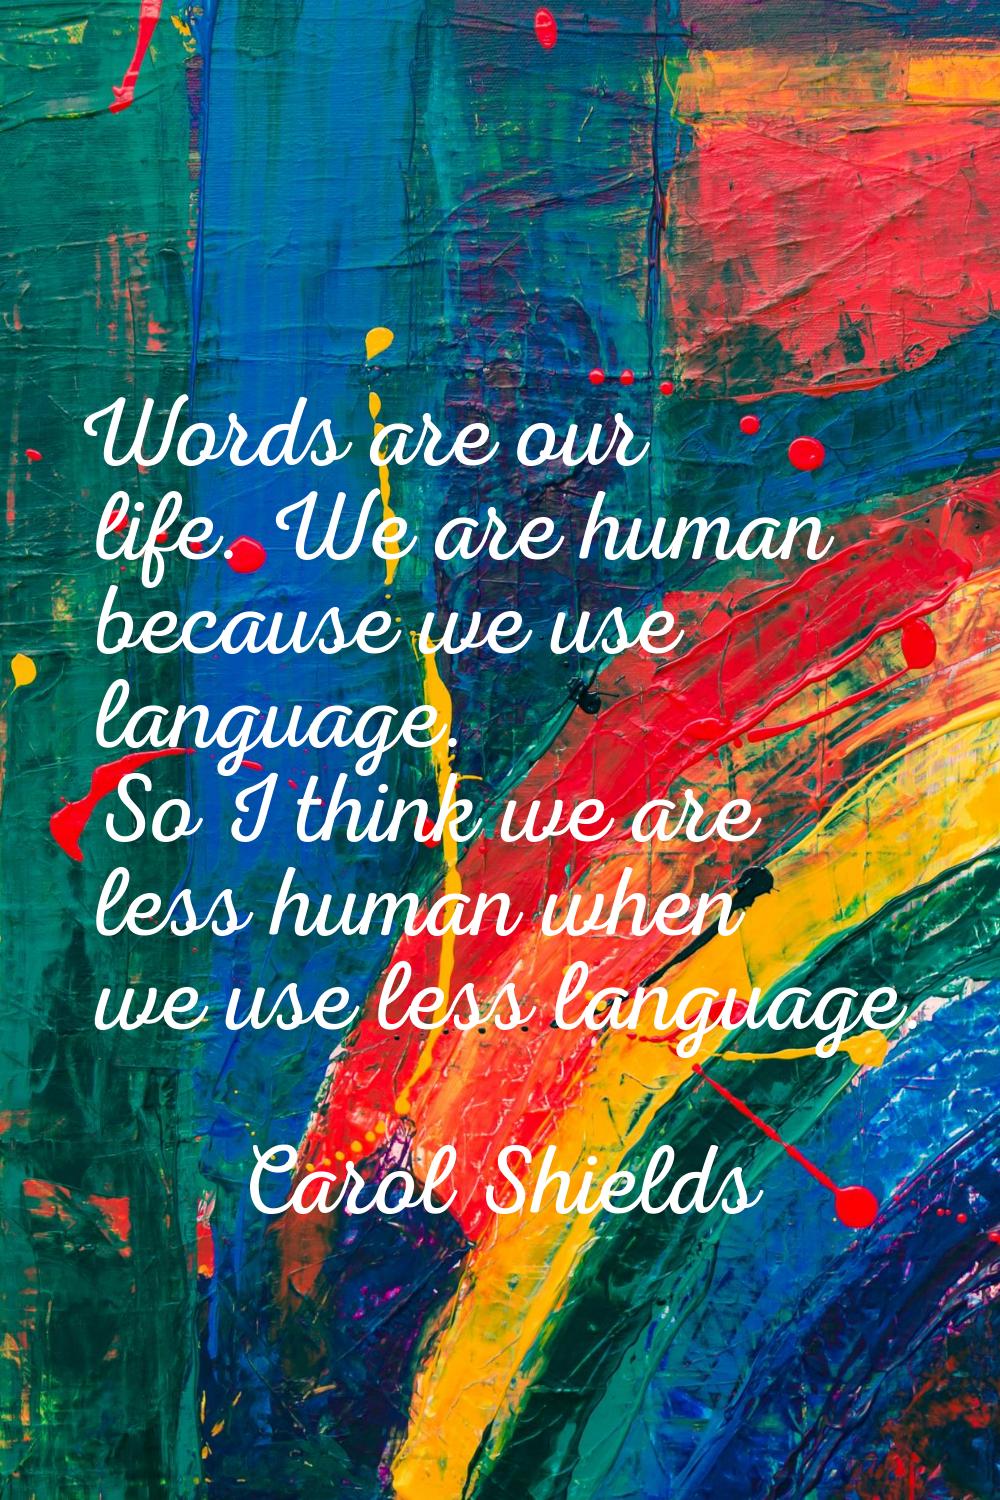 Words are our life. We are human because we use language. So I think we are less human when we use 